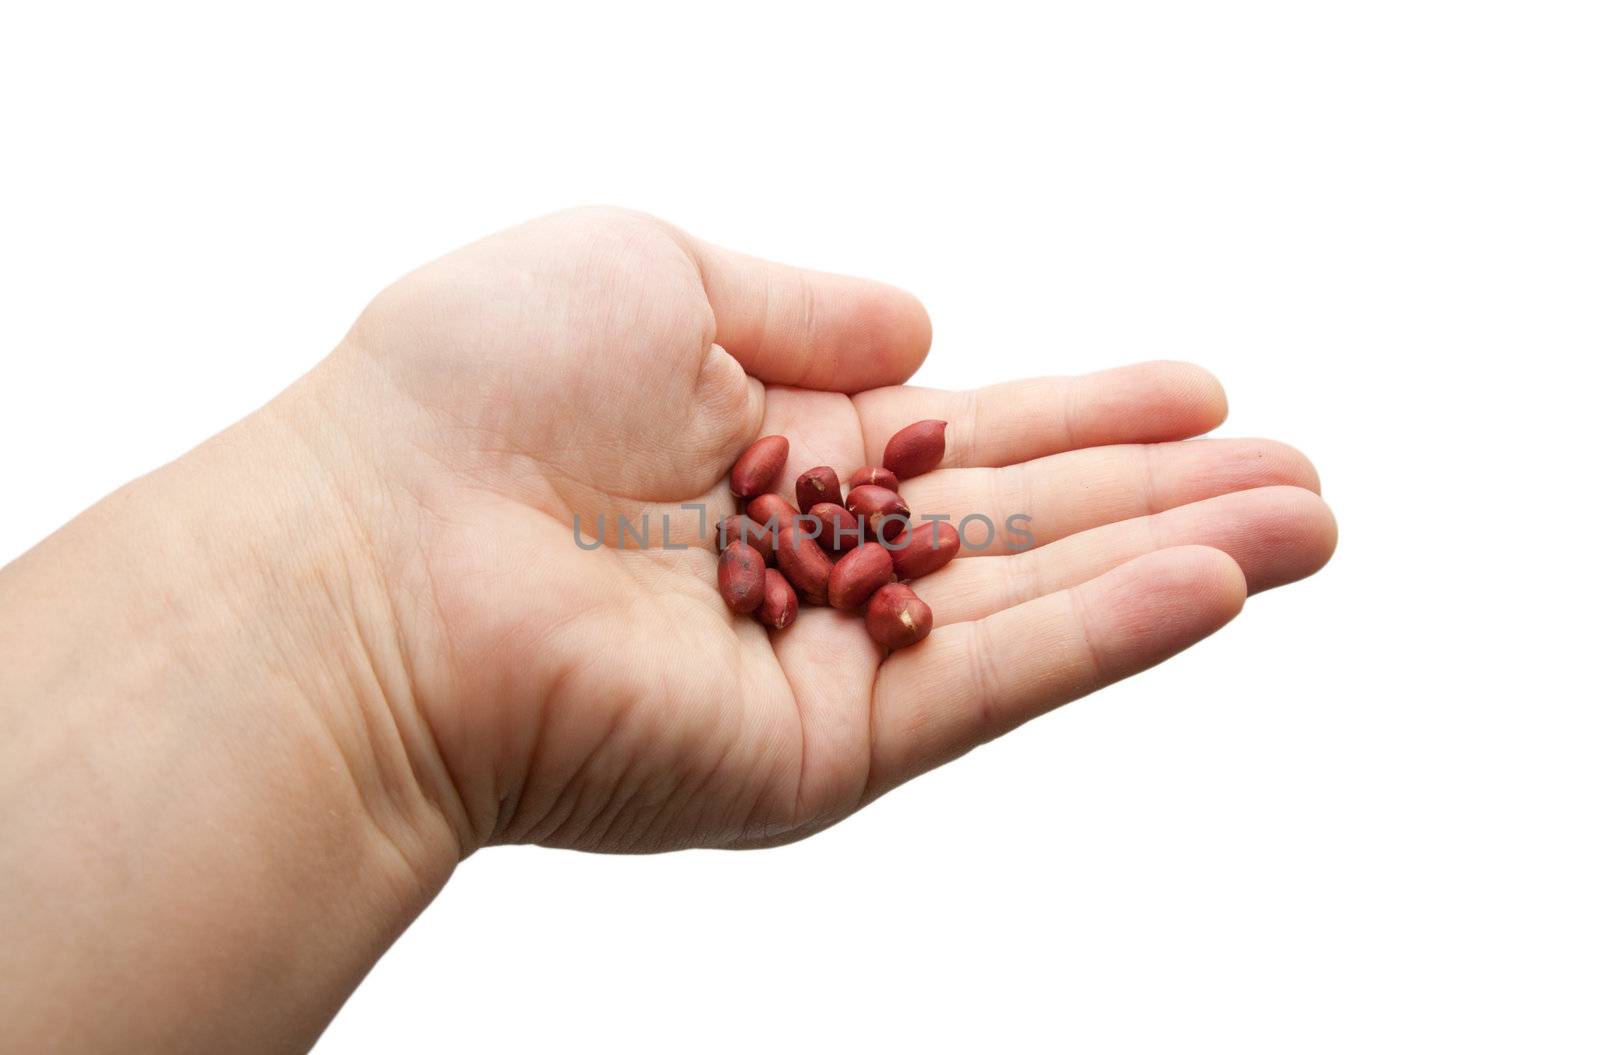 peanuts in his hand on a white background